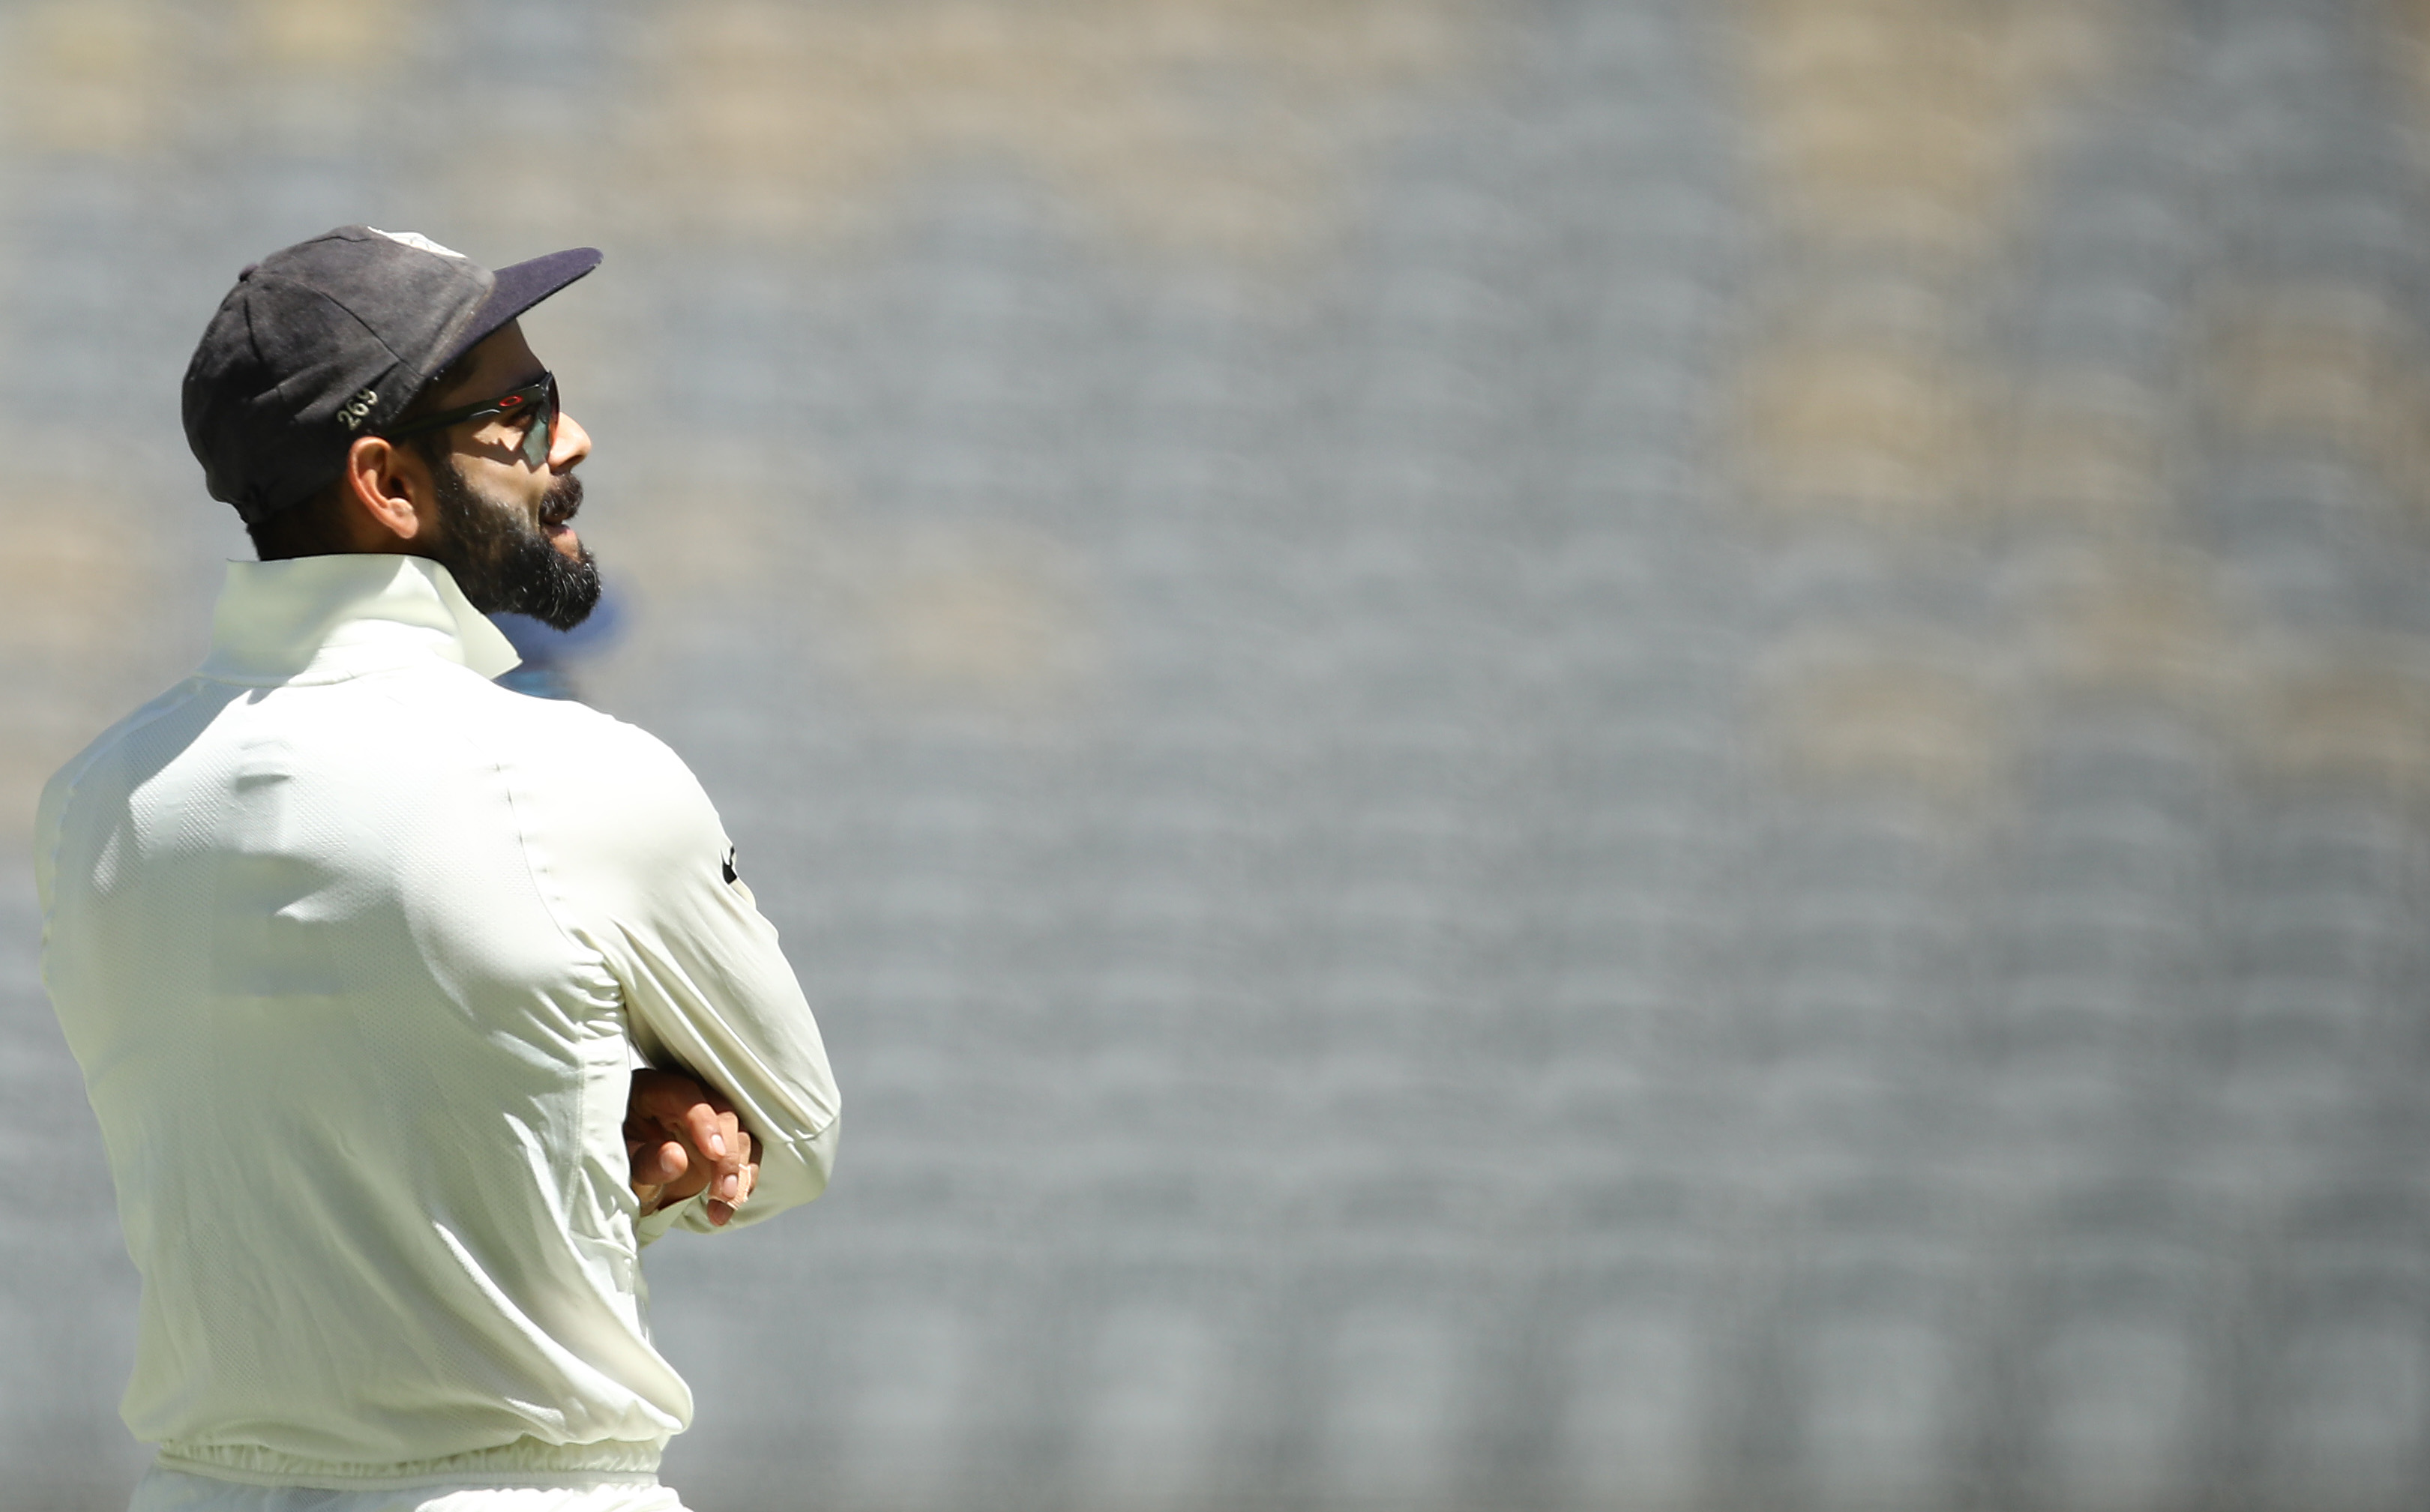 We always look up to footballers for their fitness and discipline, says Virat Kohli